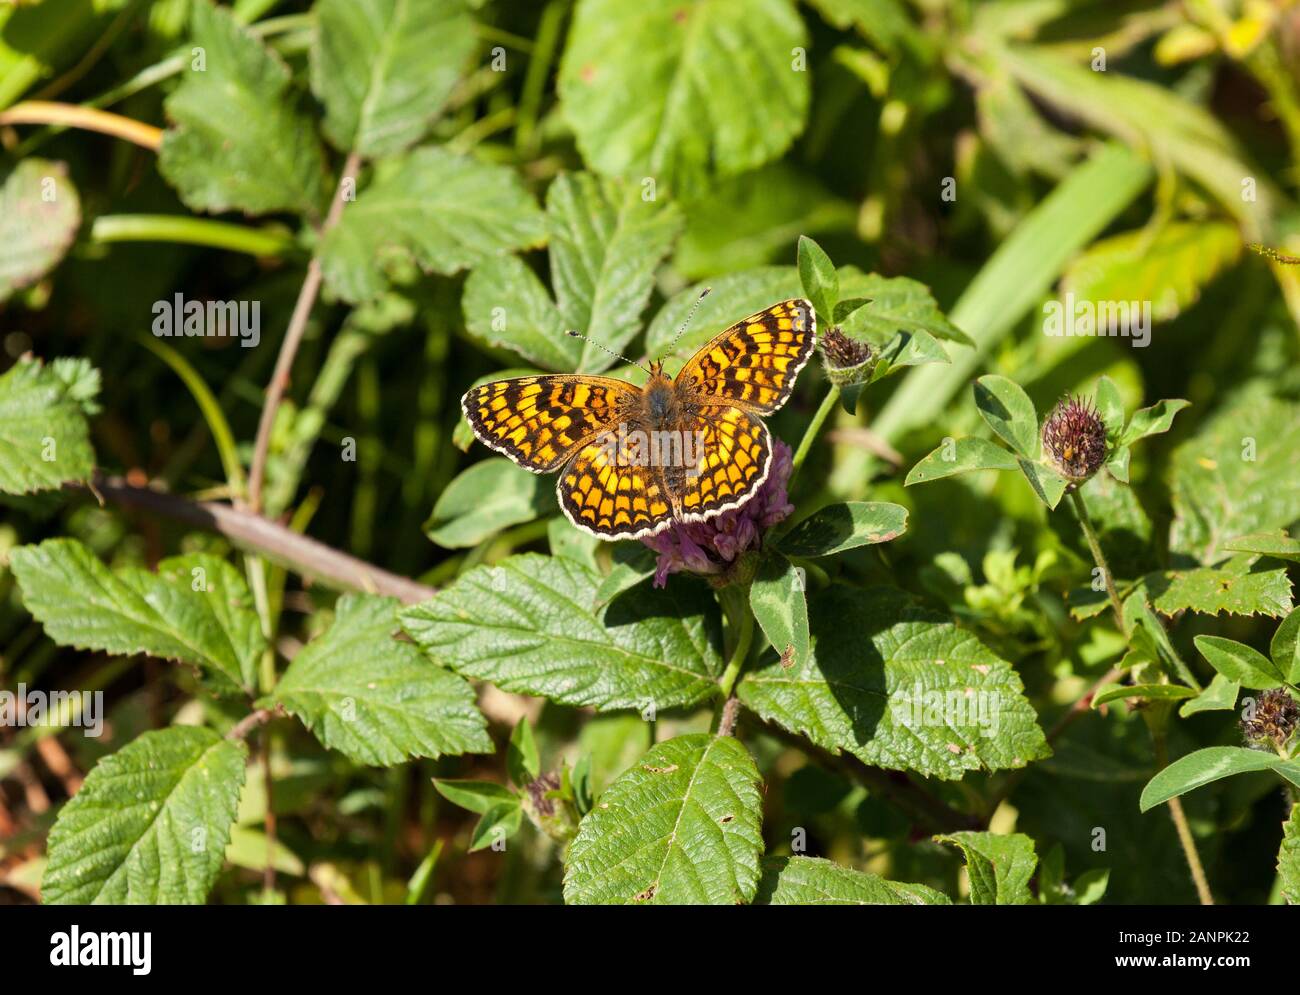 Knapweed Fritillary butterfly Melitaea phoebe  on a flower head in the Spanish countryside in the Picos de Europa Northern Spain Stock Photo